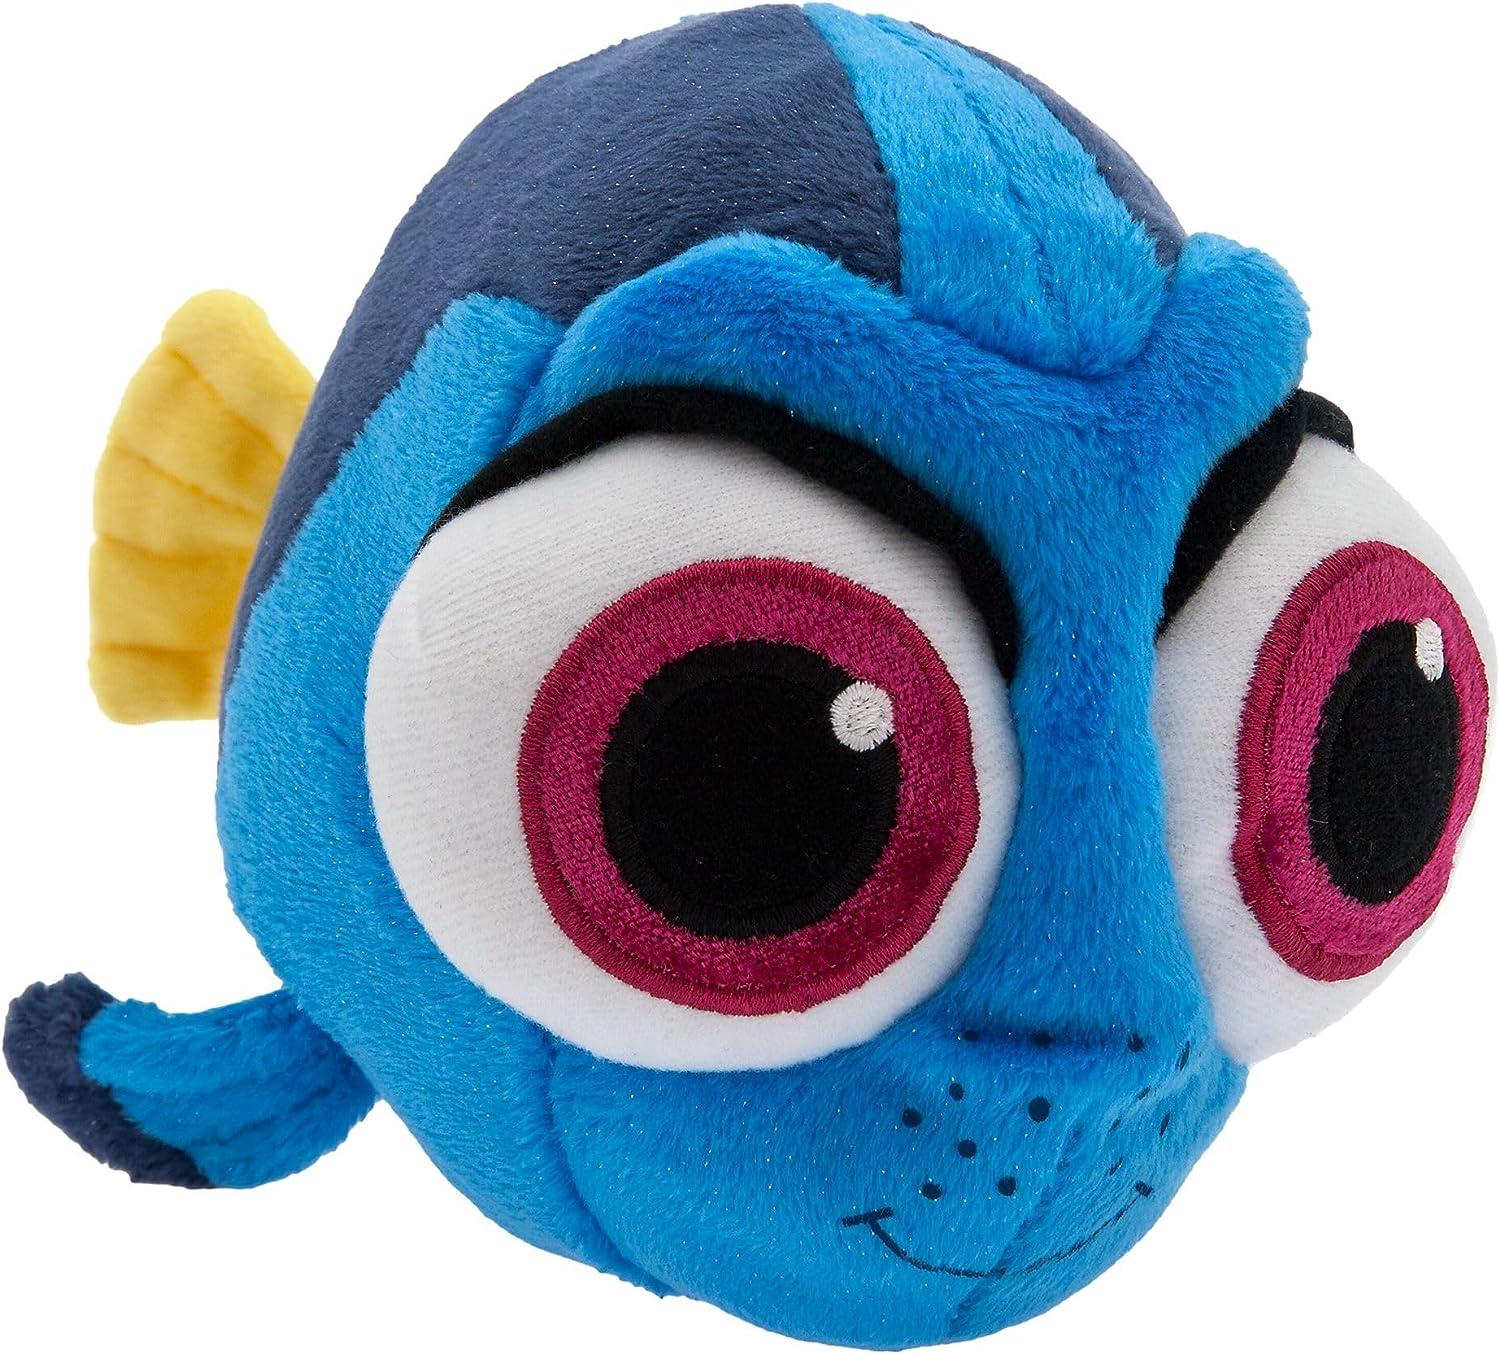 Disney Store Official BABY DORY 21cm Soft Plush Toy